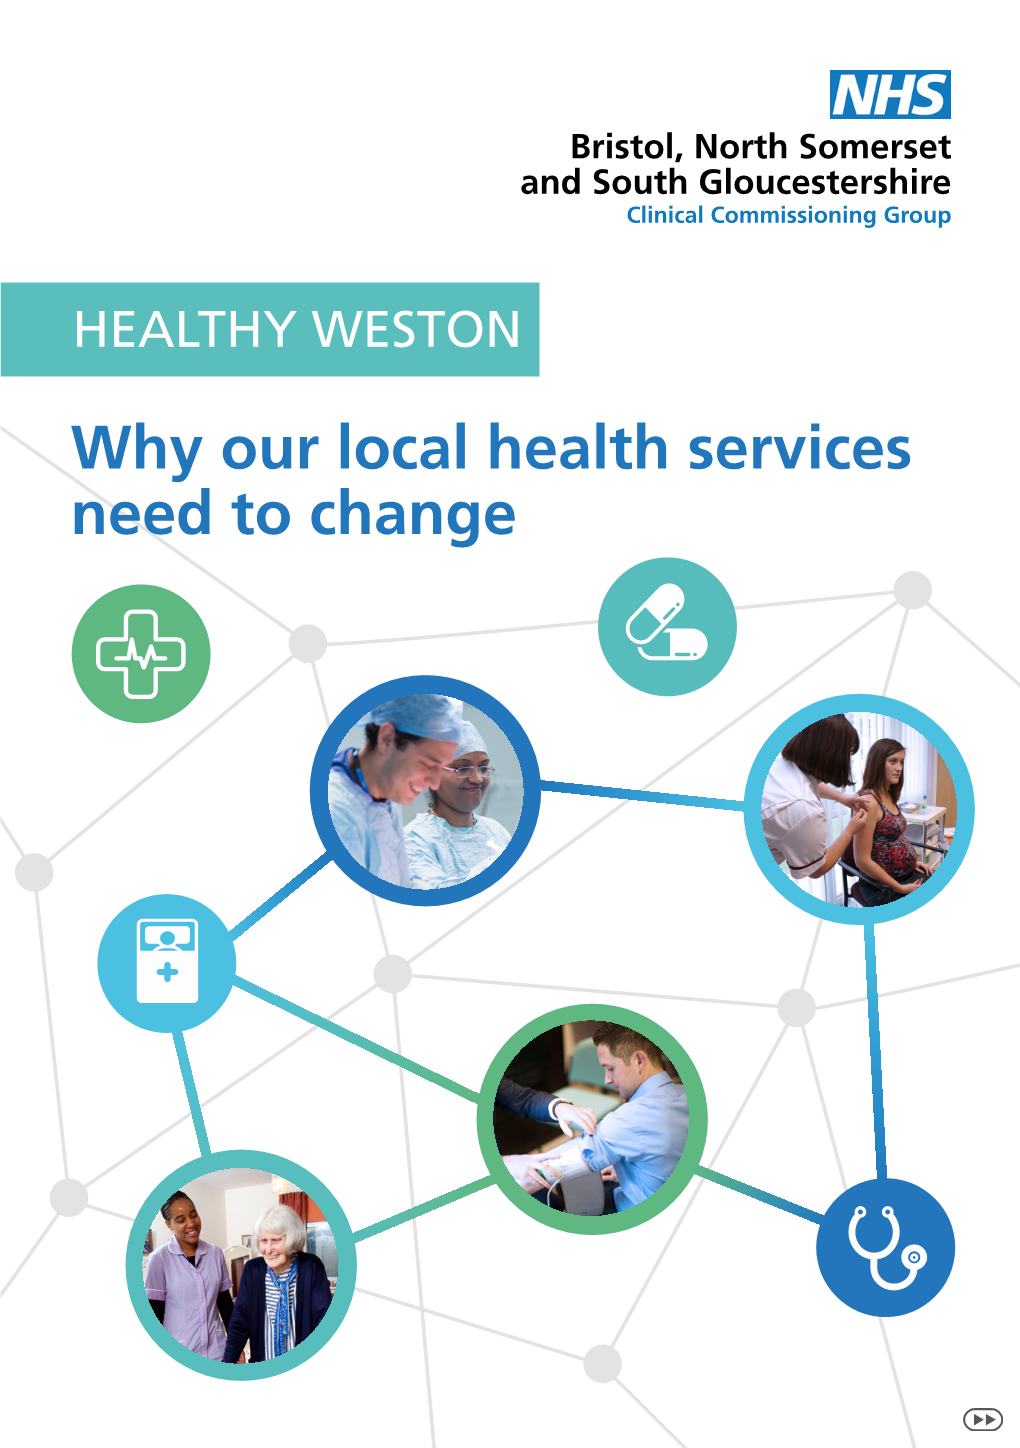 Why Our Local Health Services Need to Change